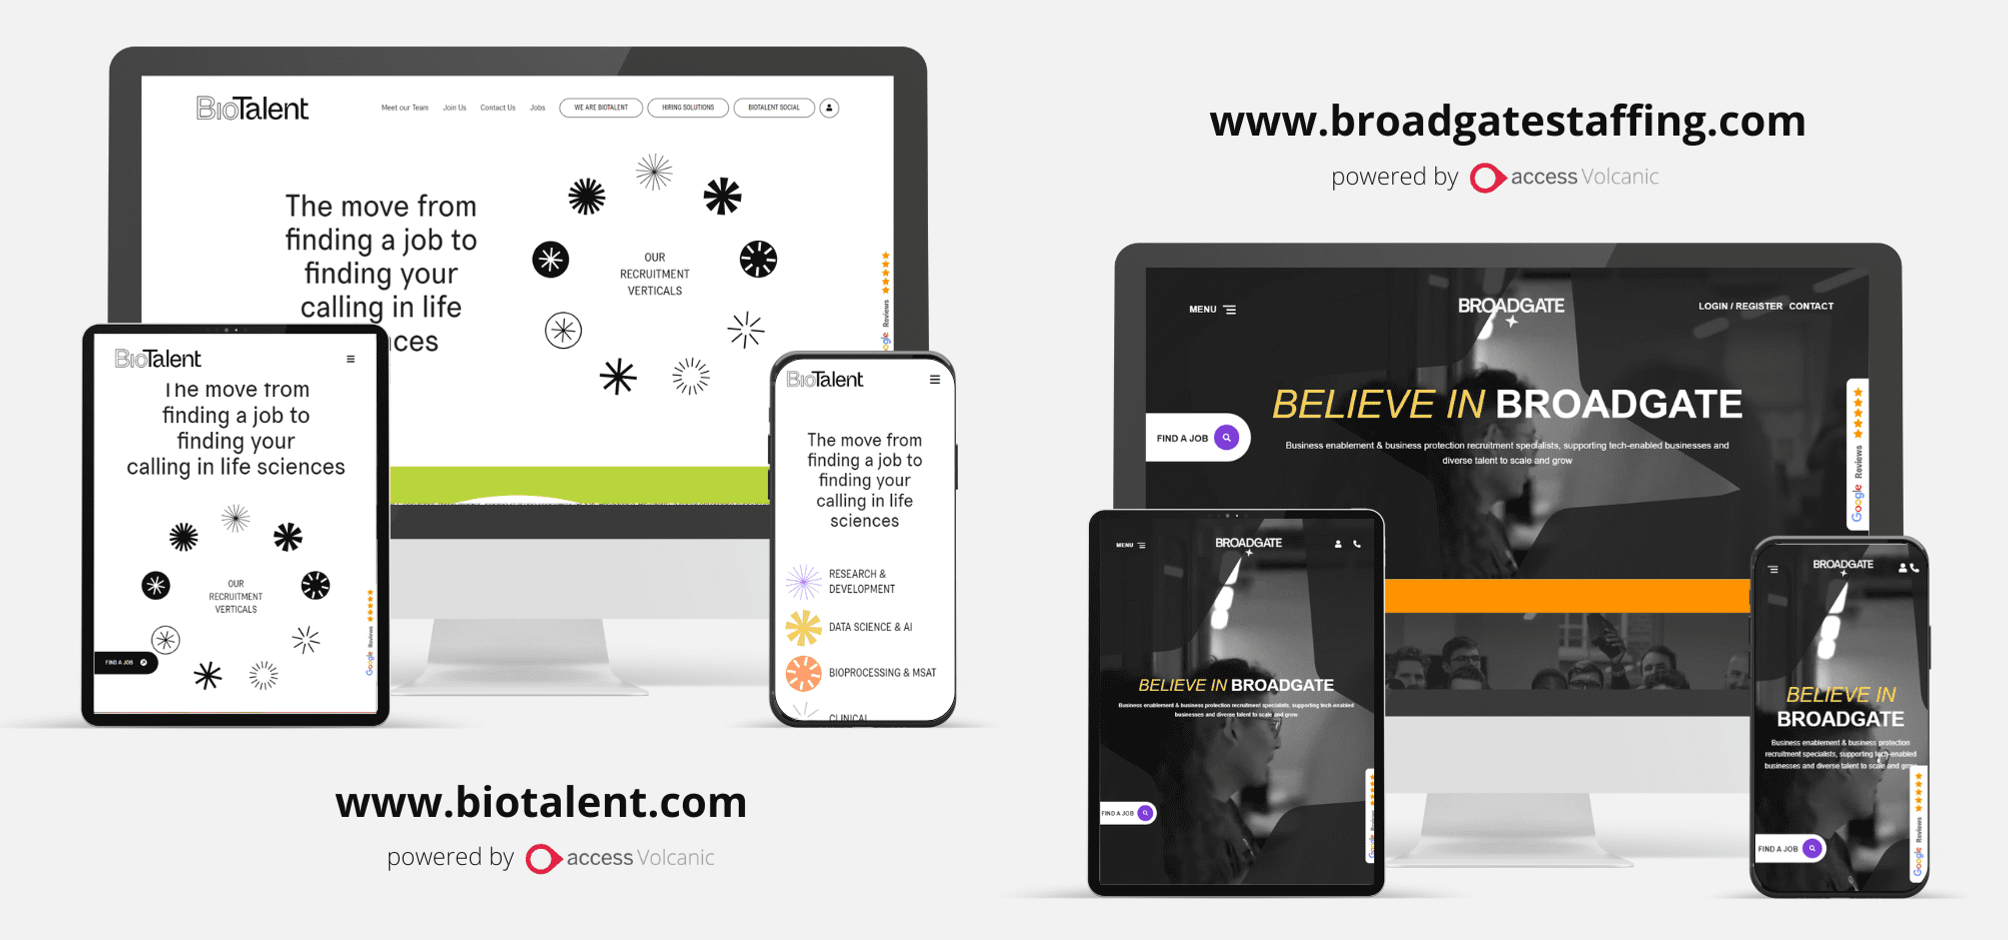 BioTalent and Broadgate Staffing recruitment websites by Access volcanic